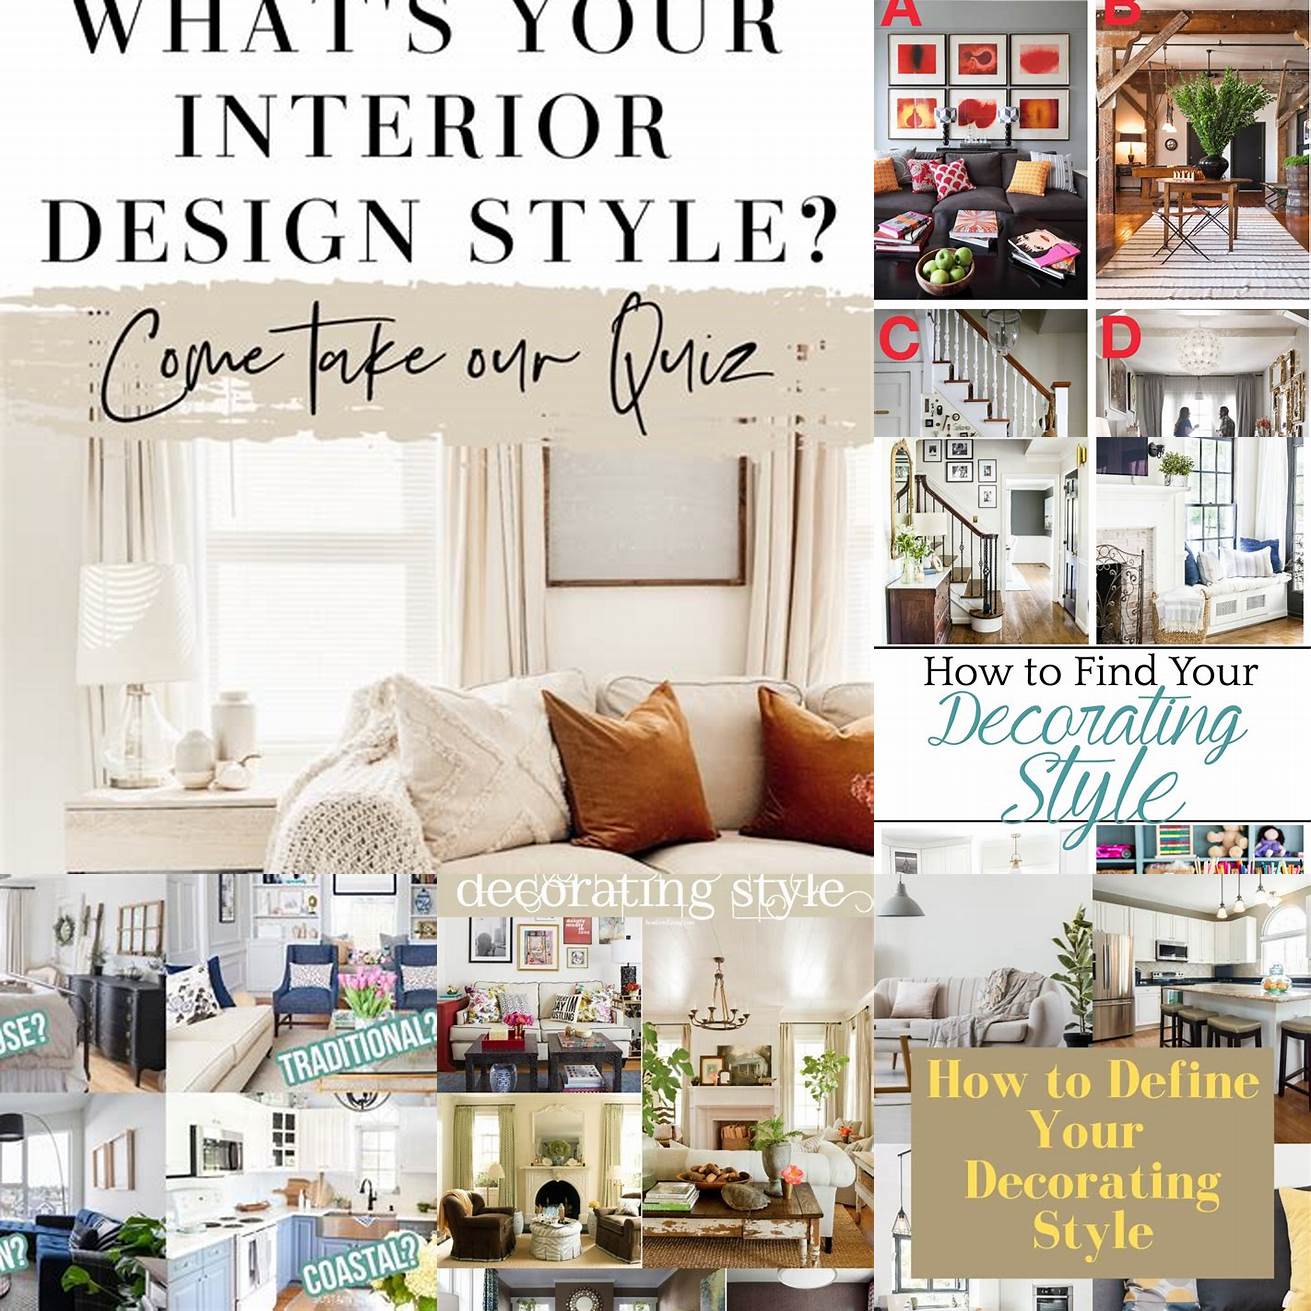 2 Determine the style of your decor